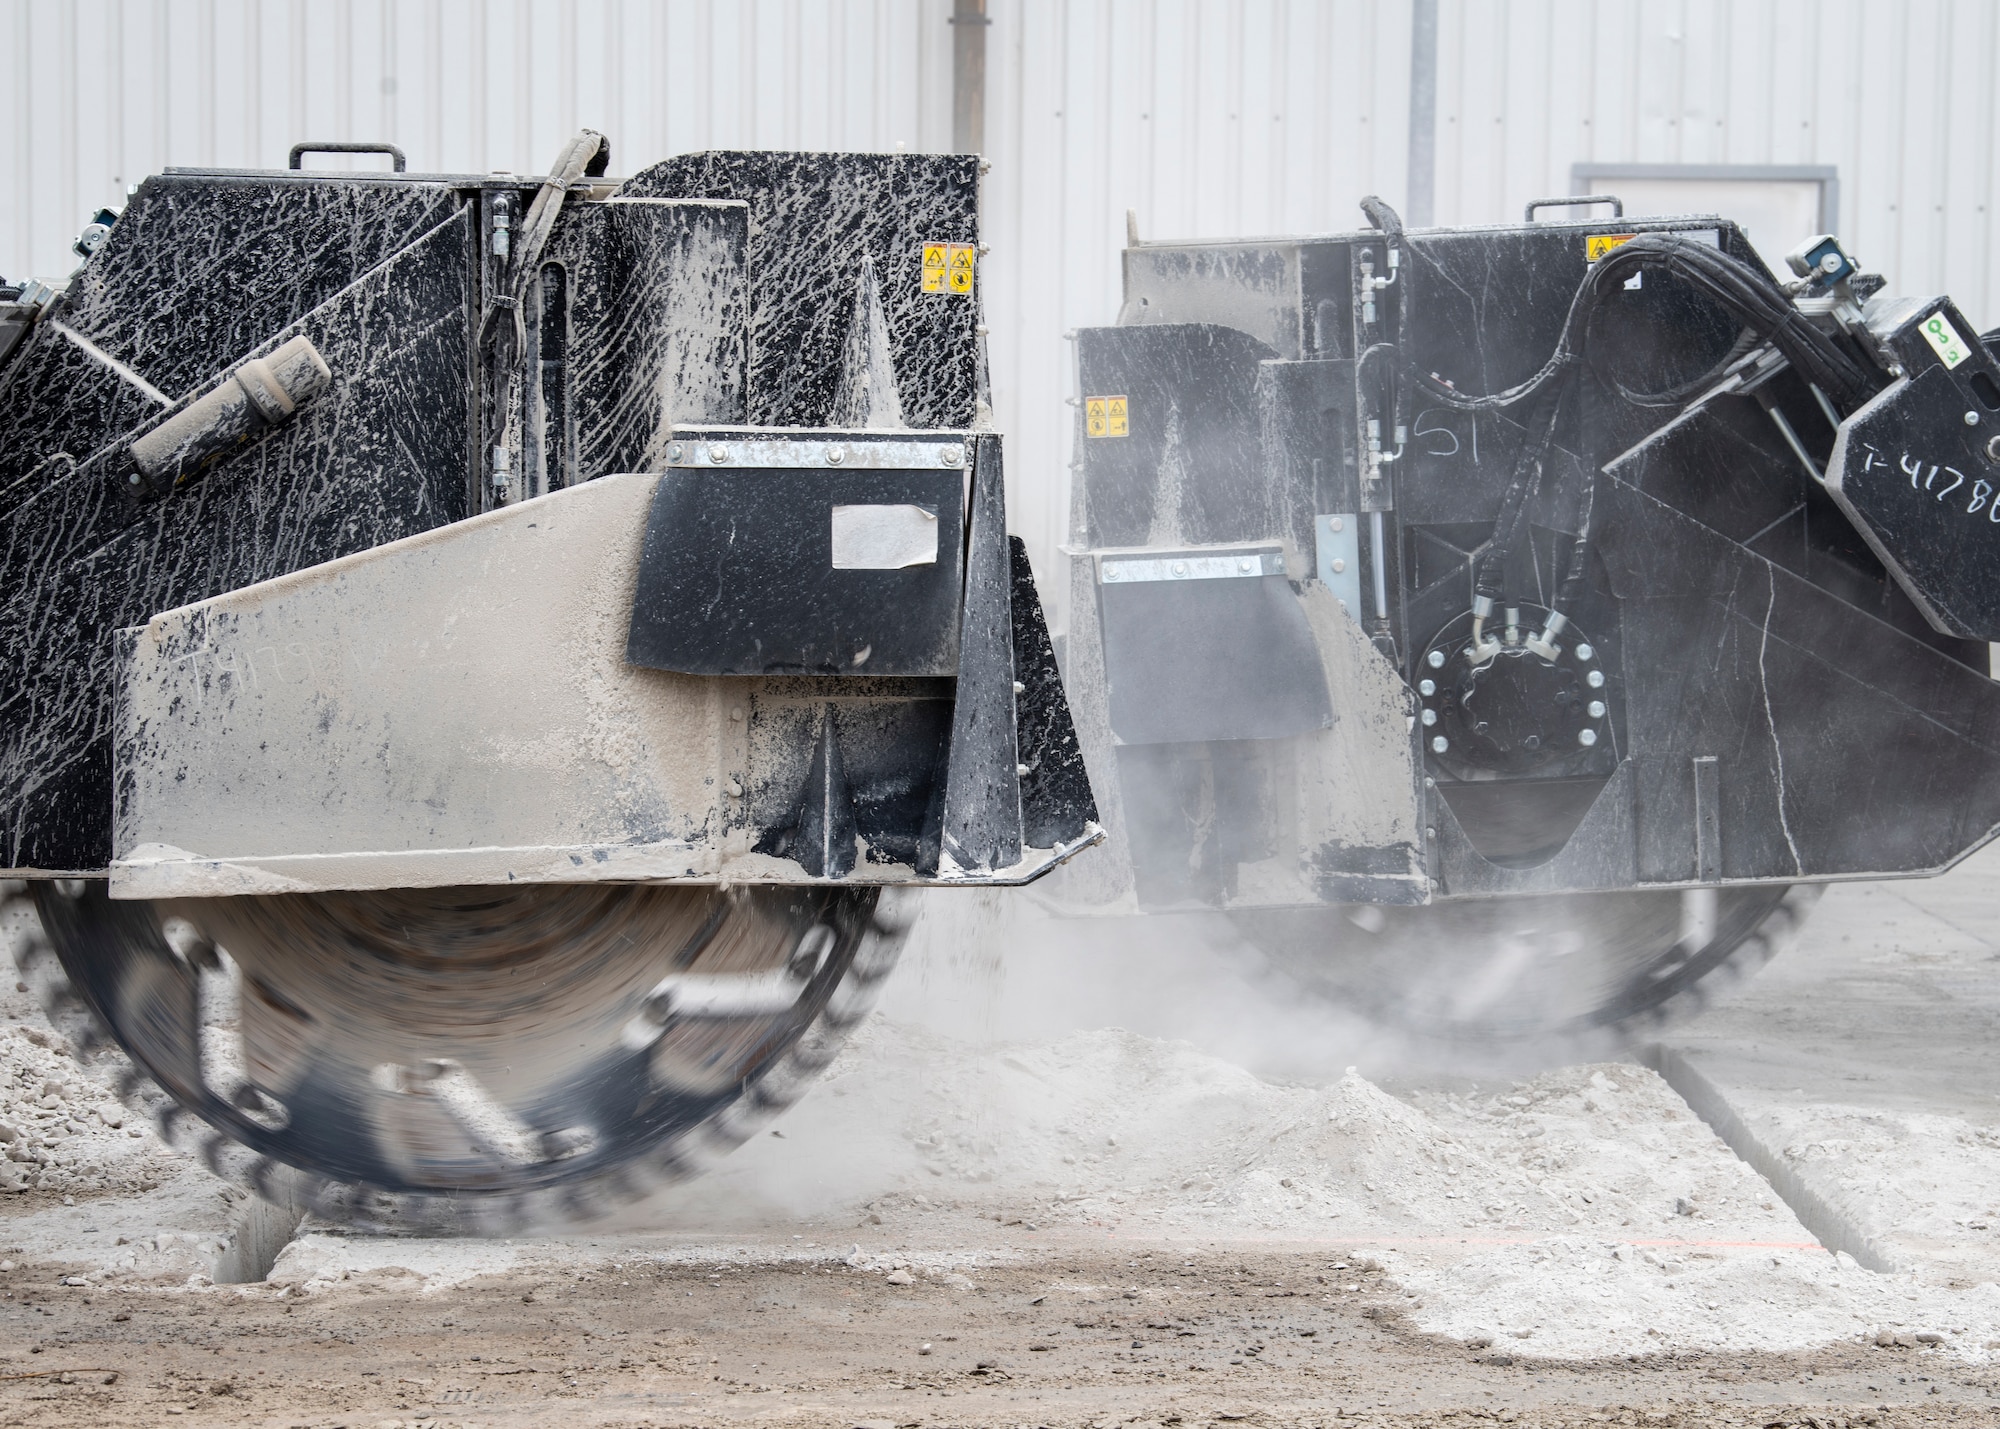 A compact track loader equipped with a 60 inch saw blade cuts into concrete during Rapid Airfield Damage Recovery training at Ramstein Air Base, Germany, April 11, 2023.